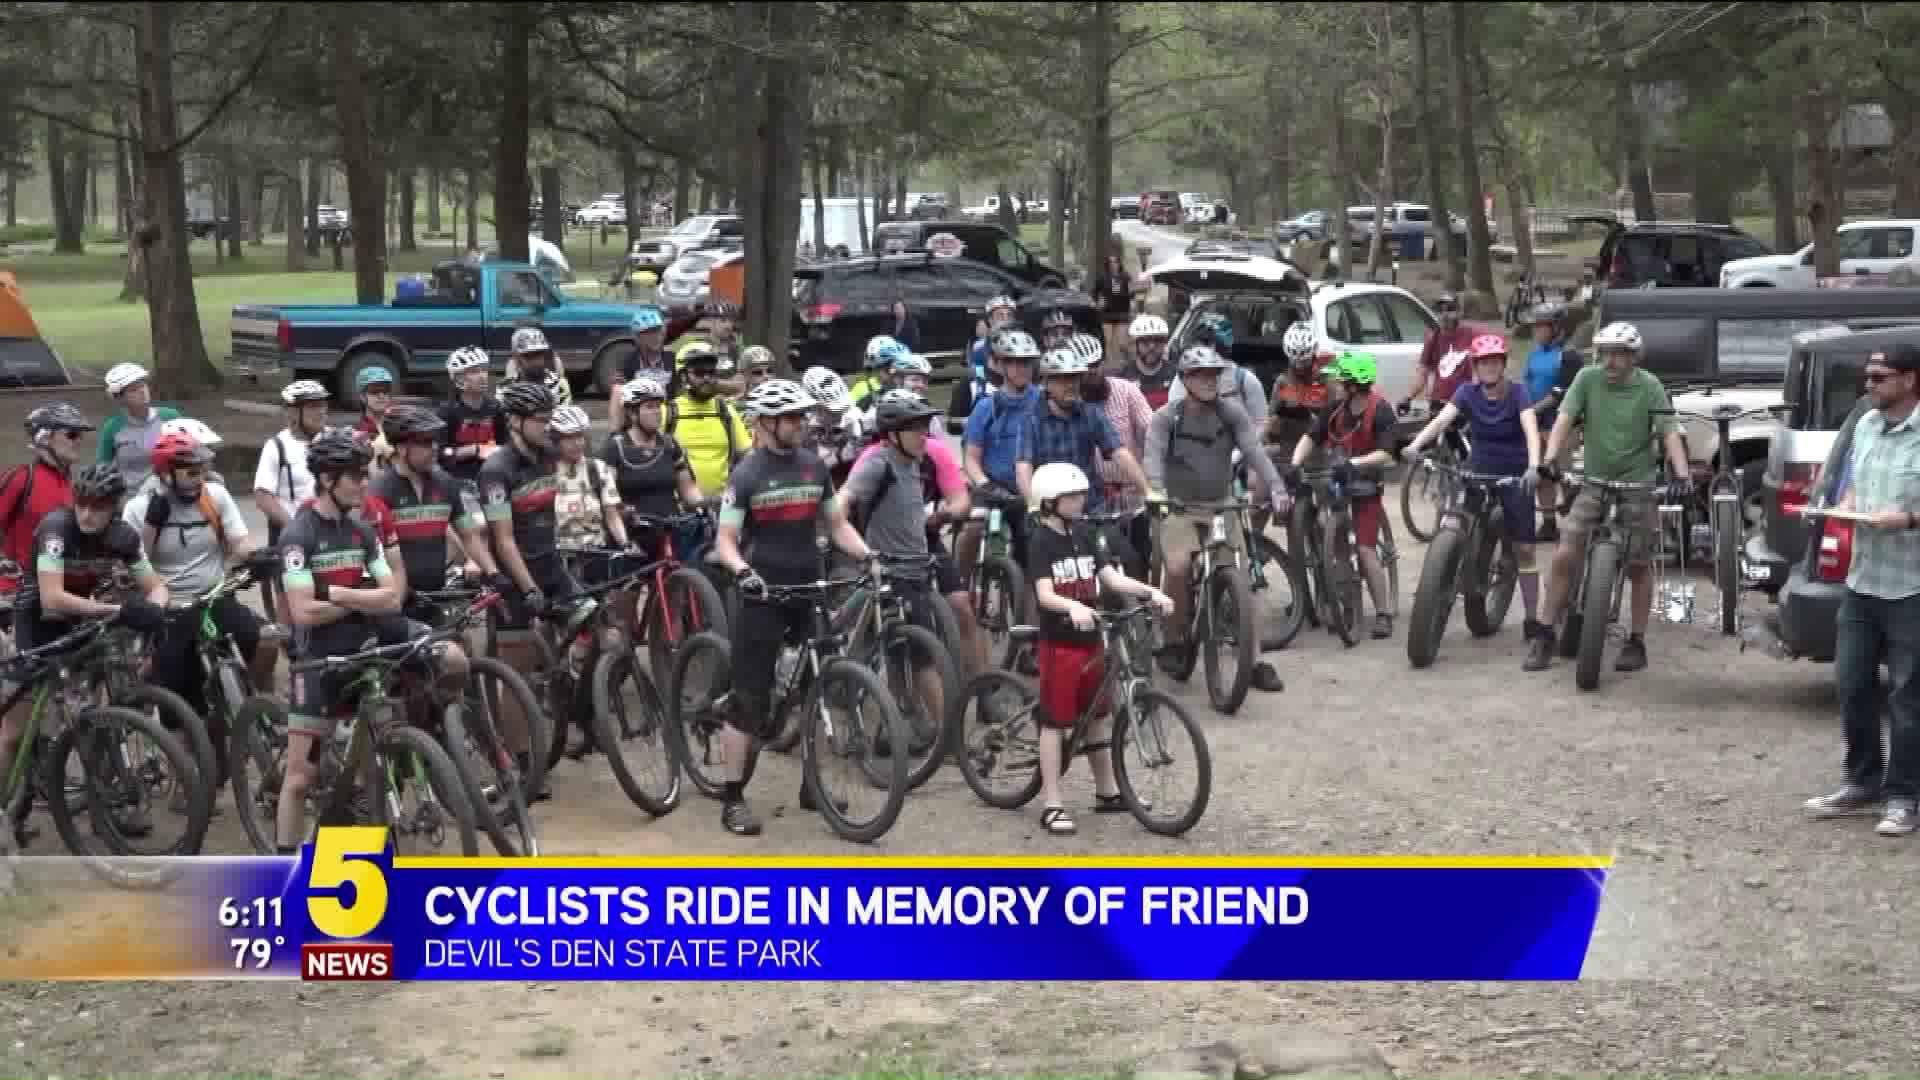 Cyclists Ride In Memory Of Friend